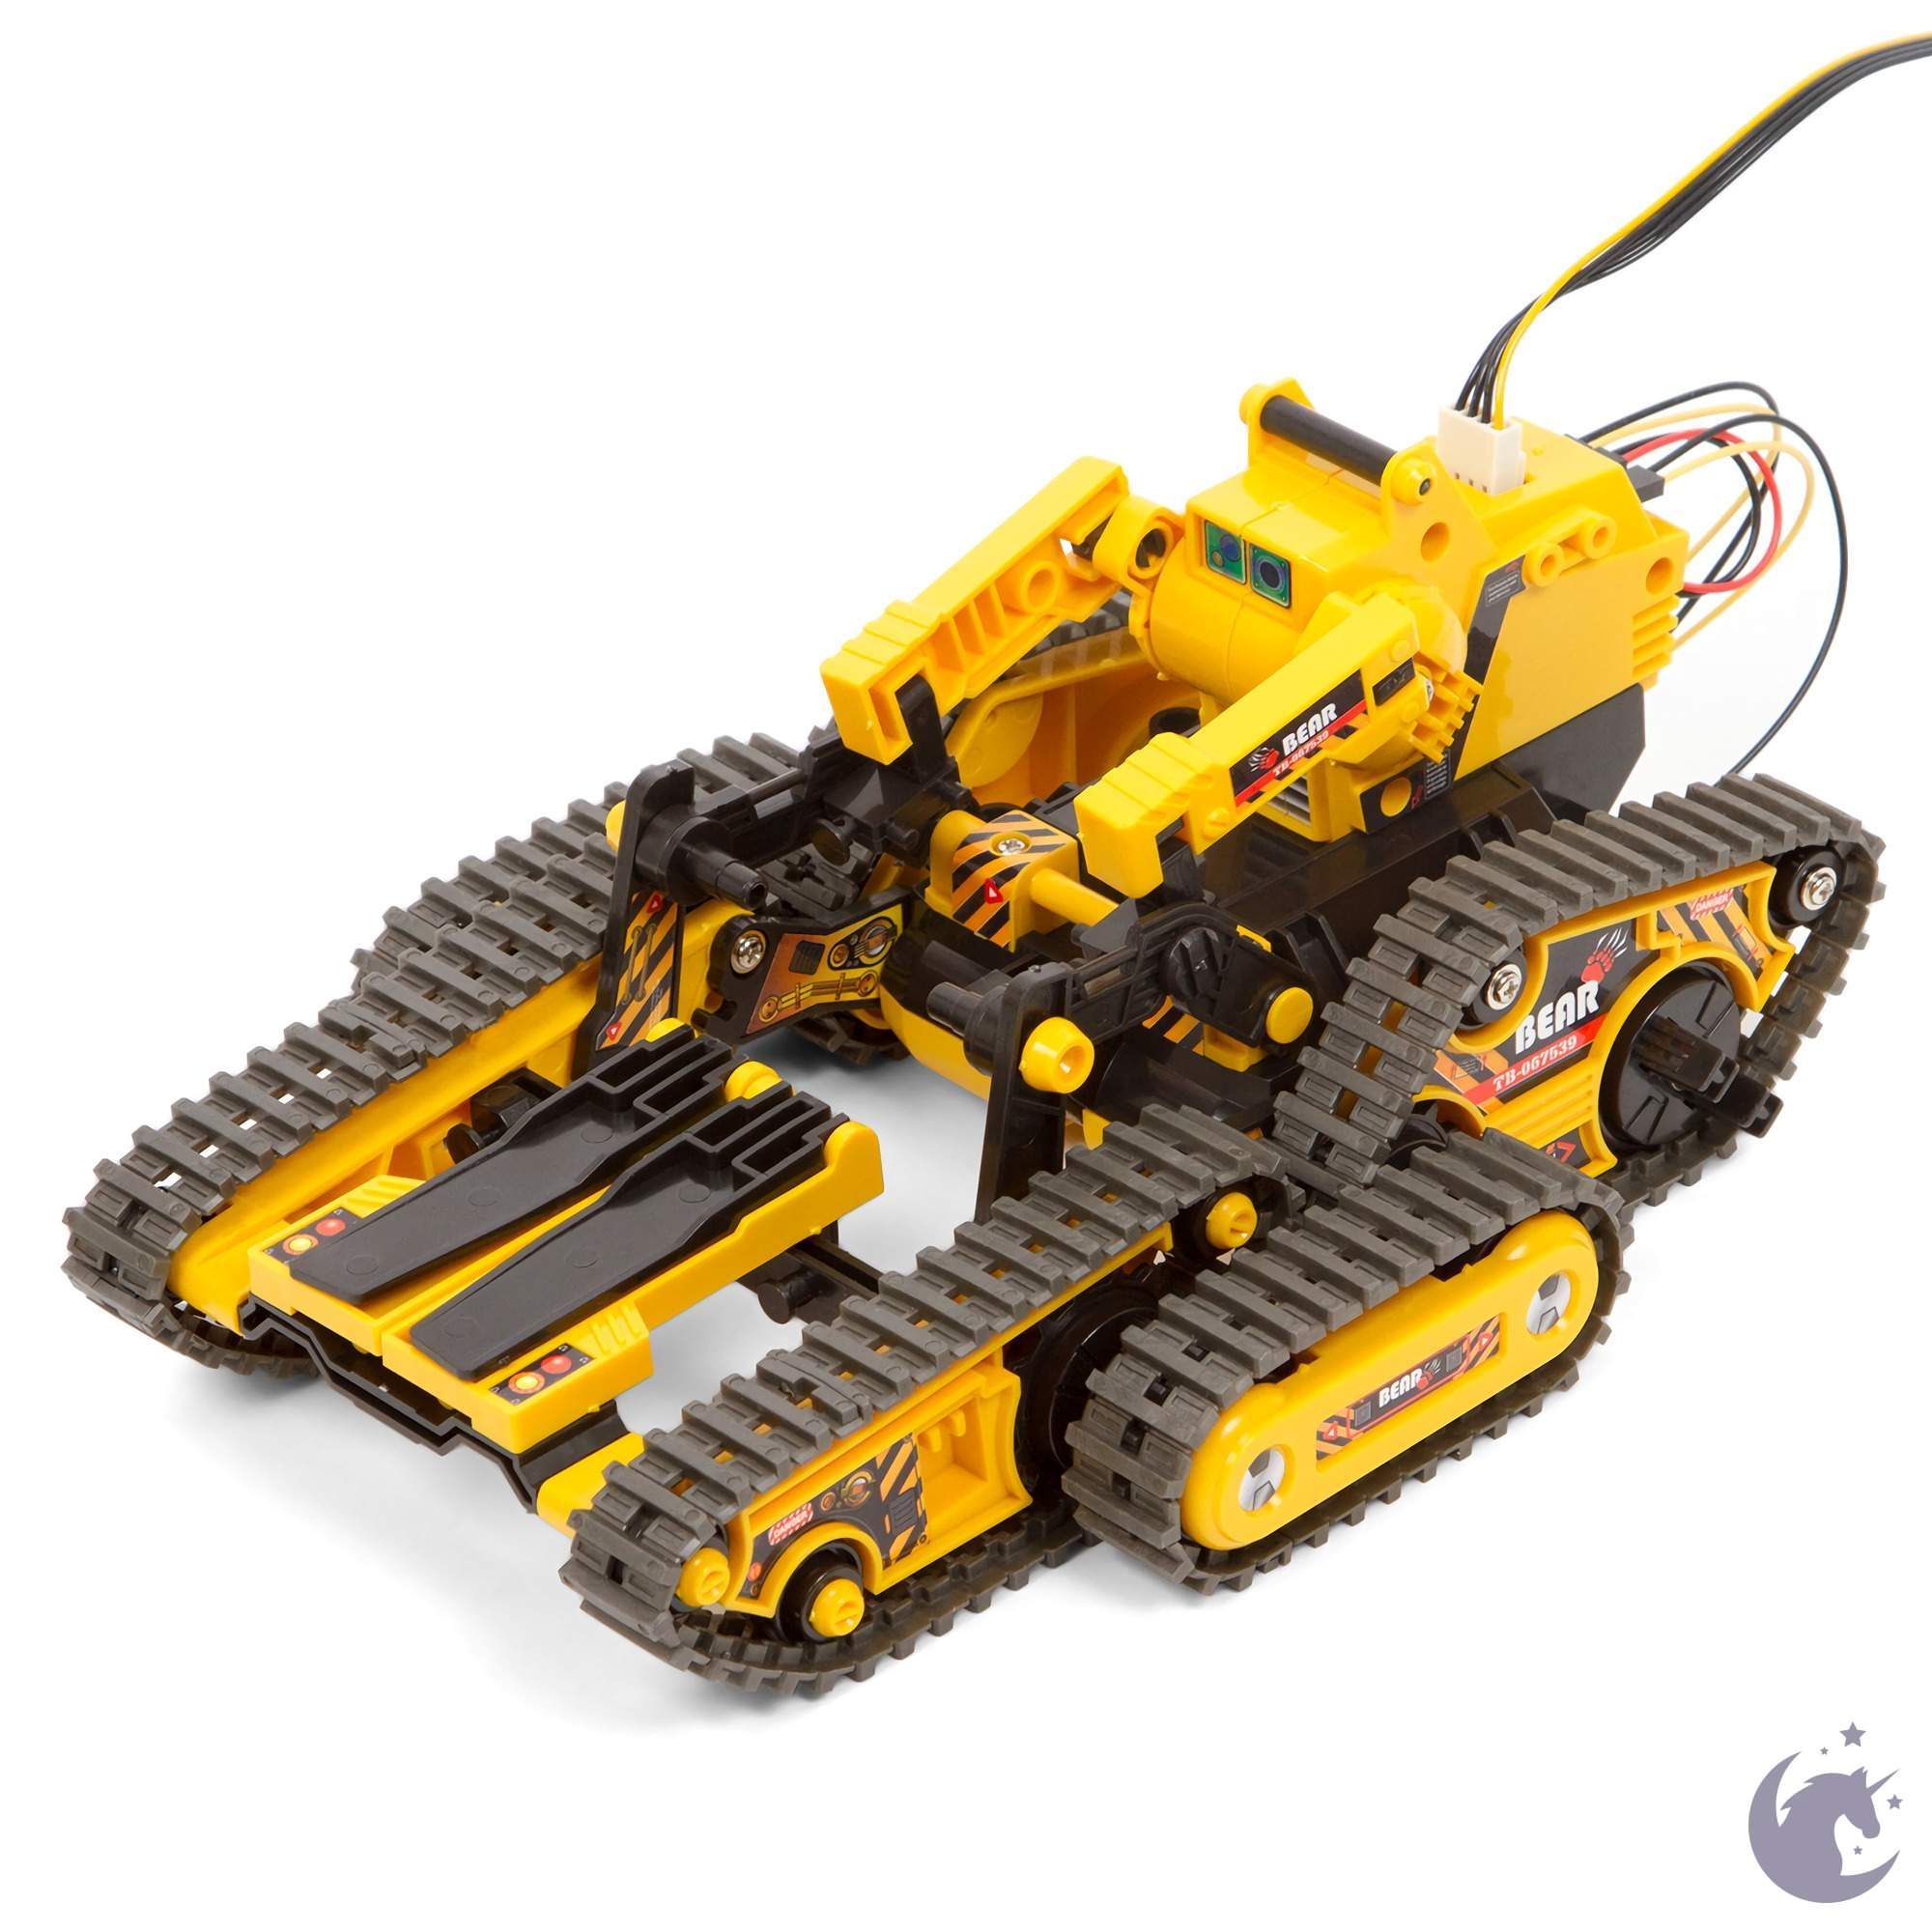 unicorntoys cic kits 3 in 1 all the terrain educational robot kit engineering stem toys for kids CIC21-536